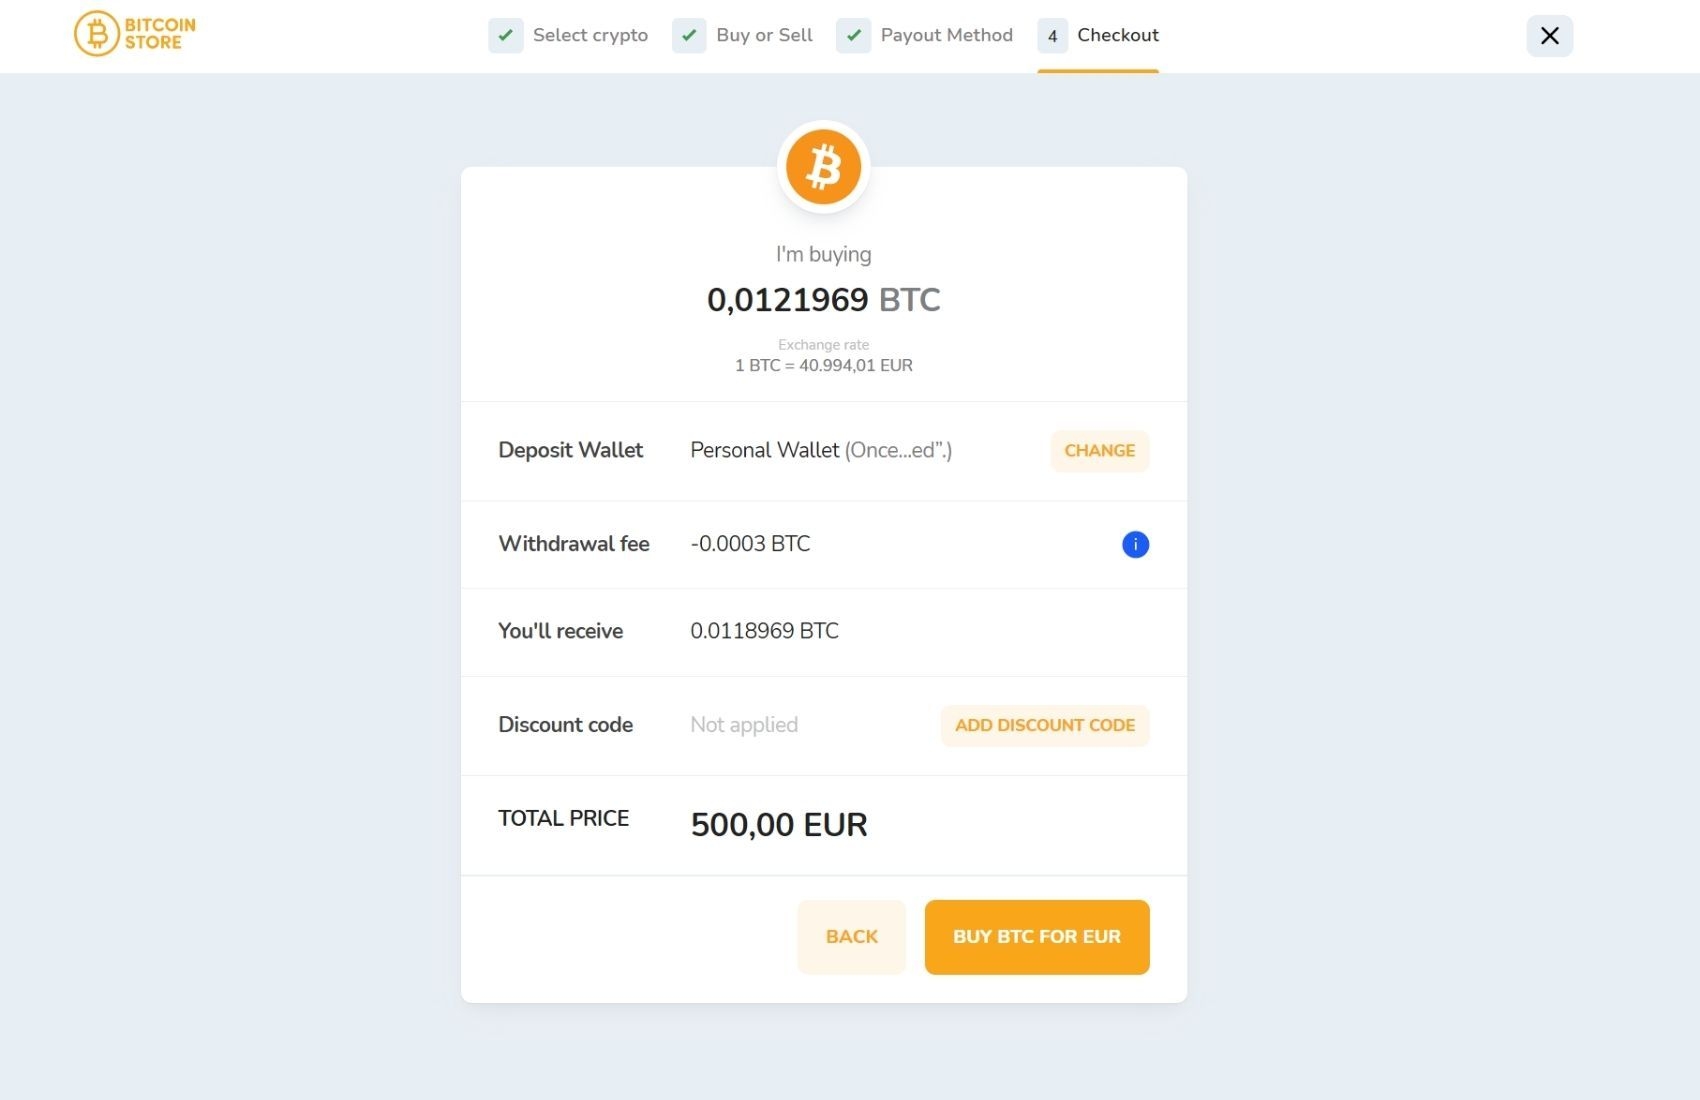 The checkout window with the deposit wallet and the cryptocurrency amount.